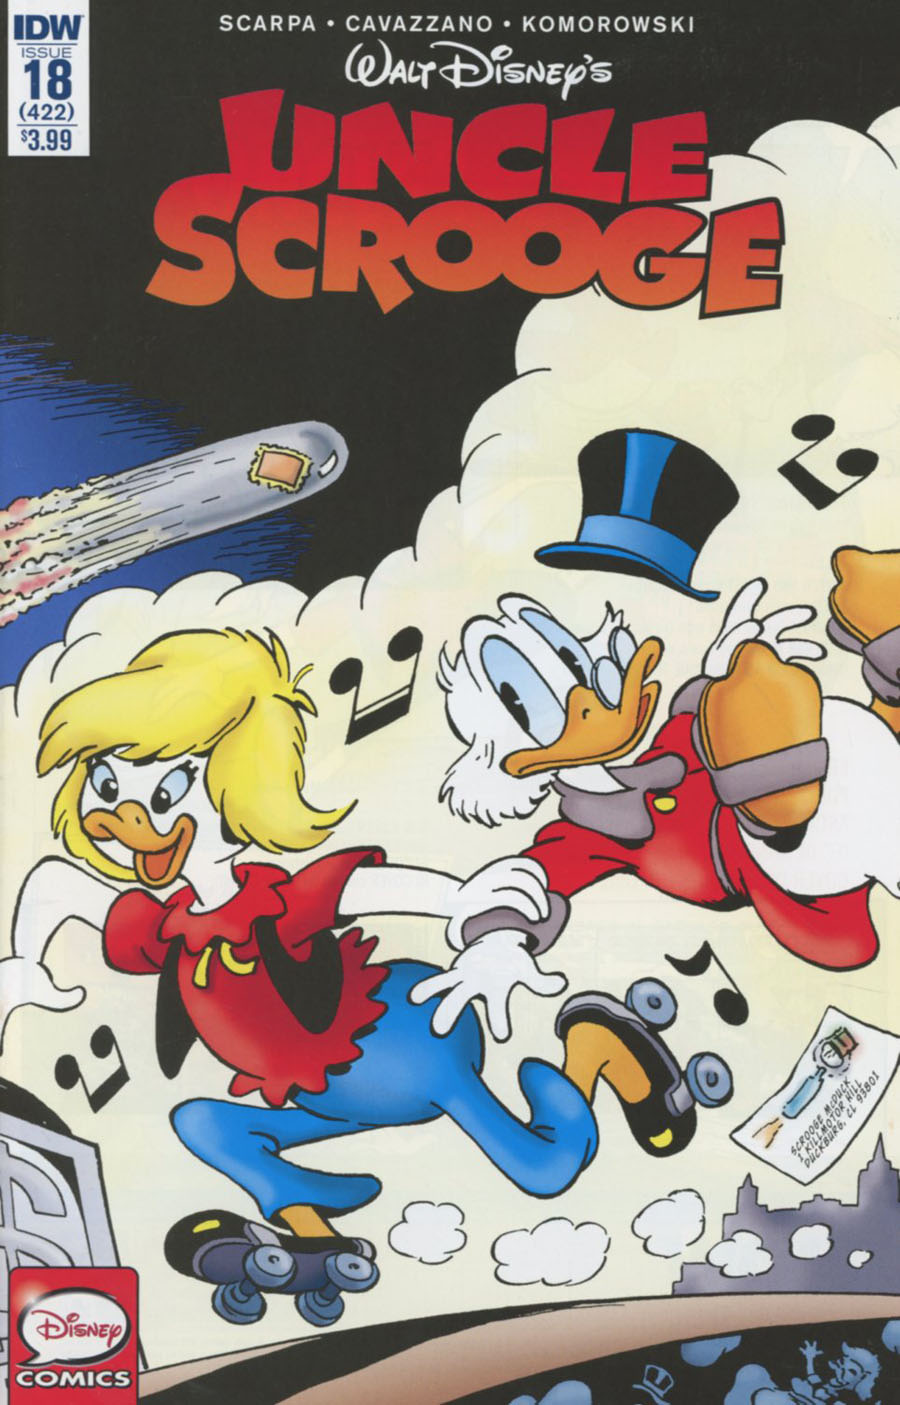 Uncle Scrooge Vol 2 #18 Cover A Regular Marco Rota Cover